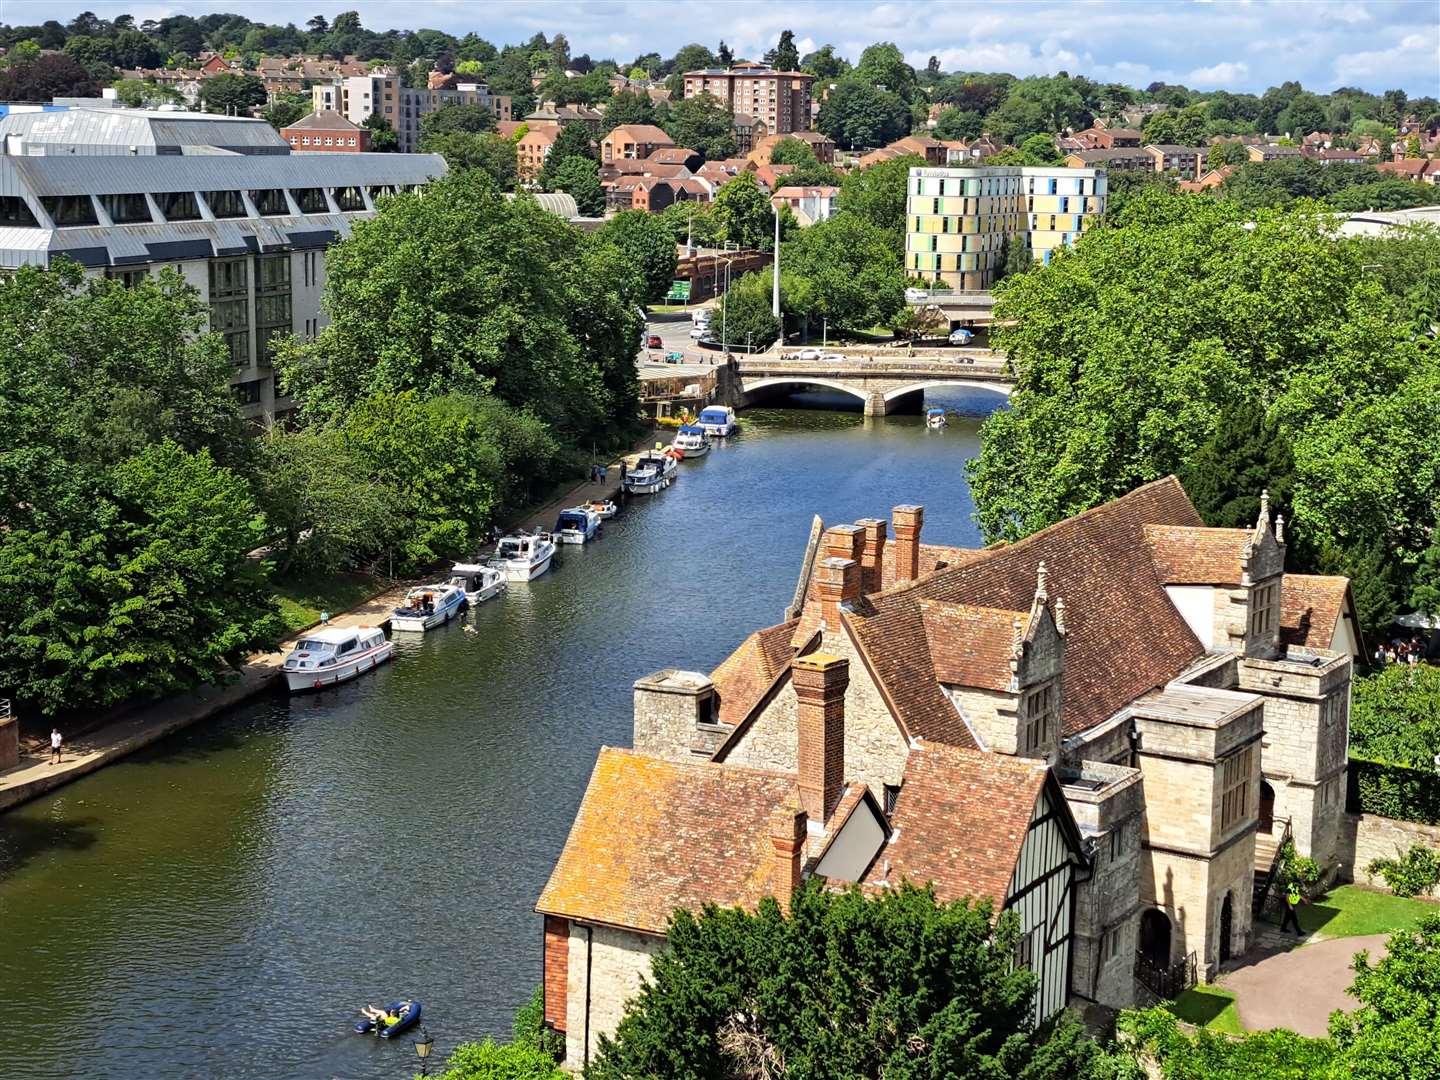 A view of Maidstone